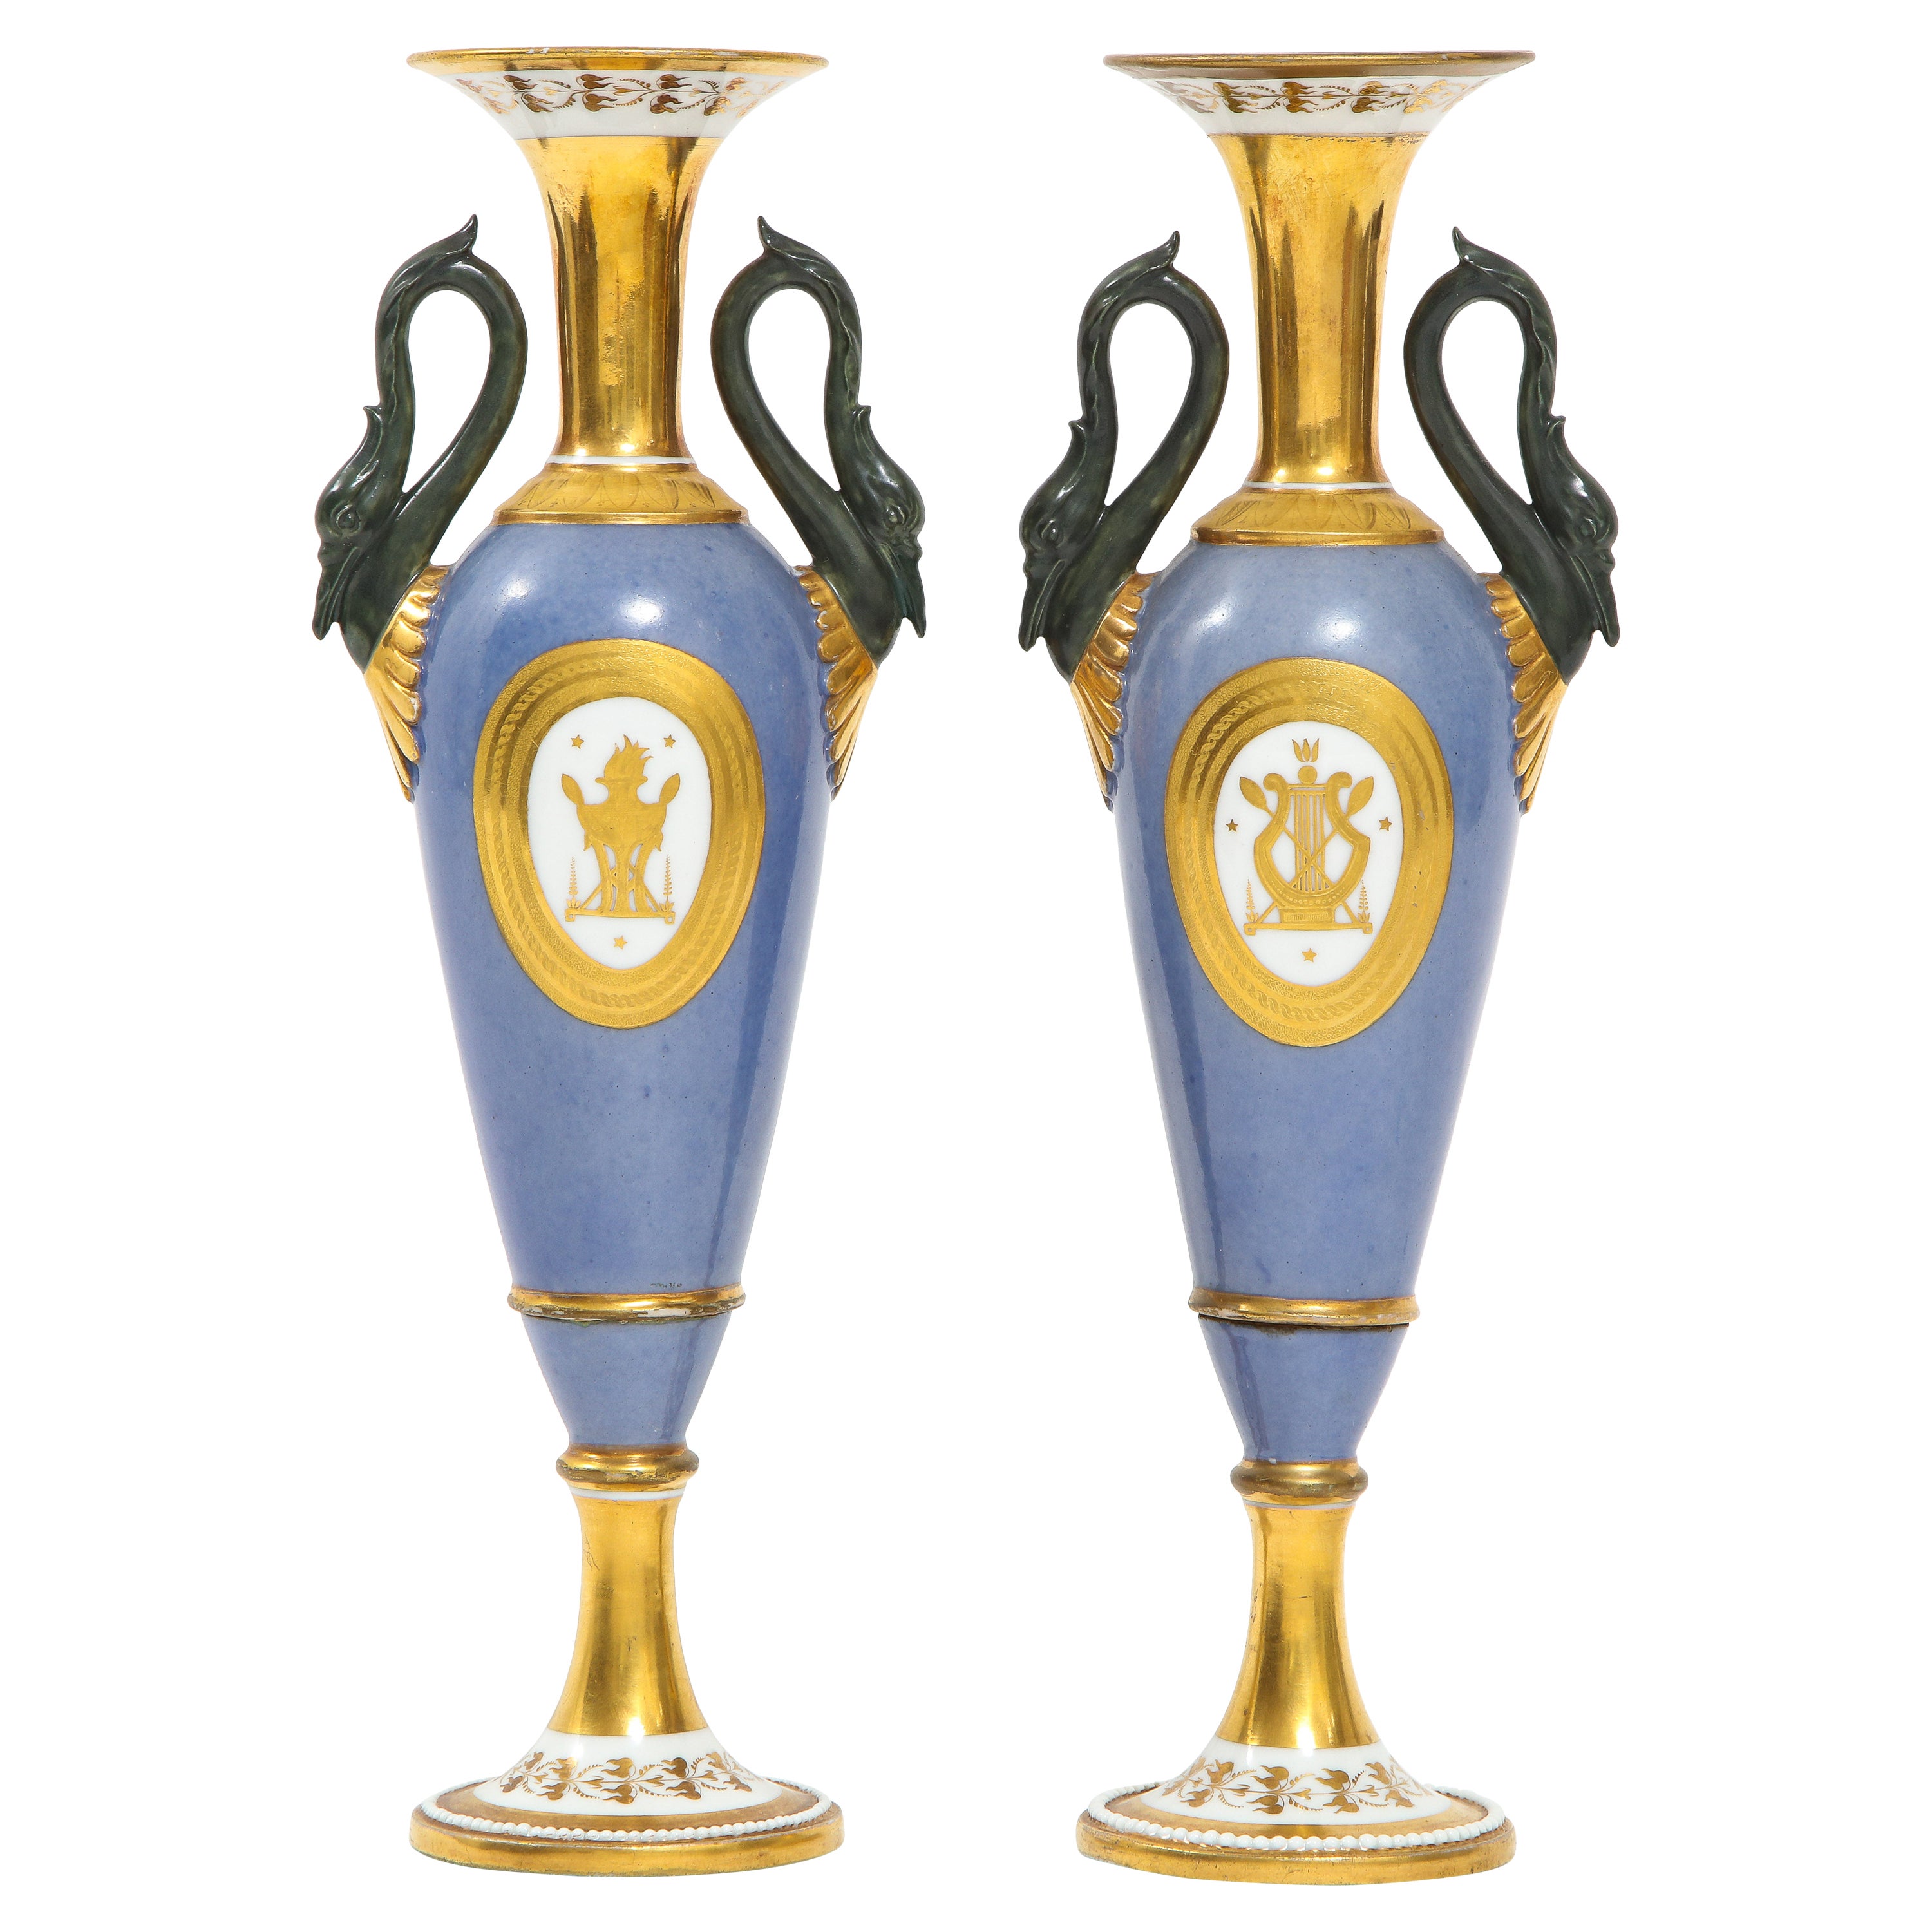 Pair of French 19th Century Old Paris Porcelain Swan Handle Vases, Marked